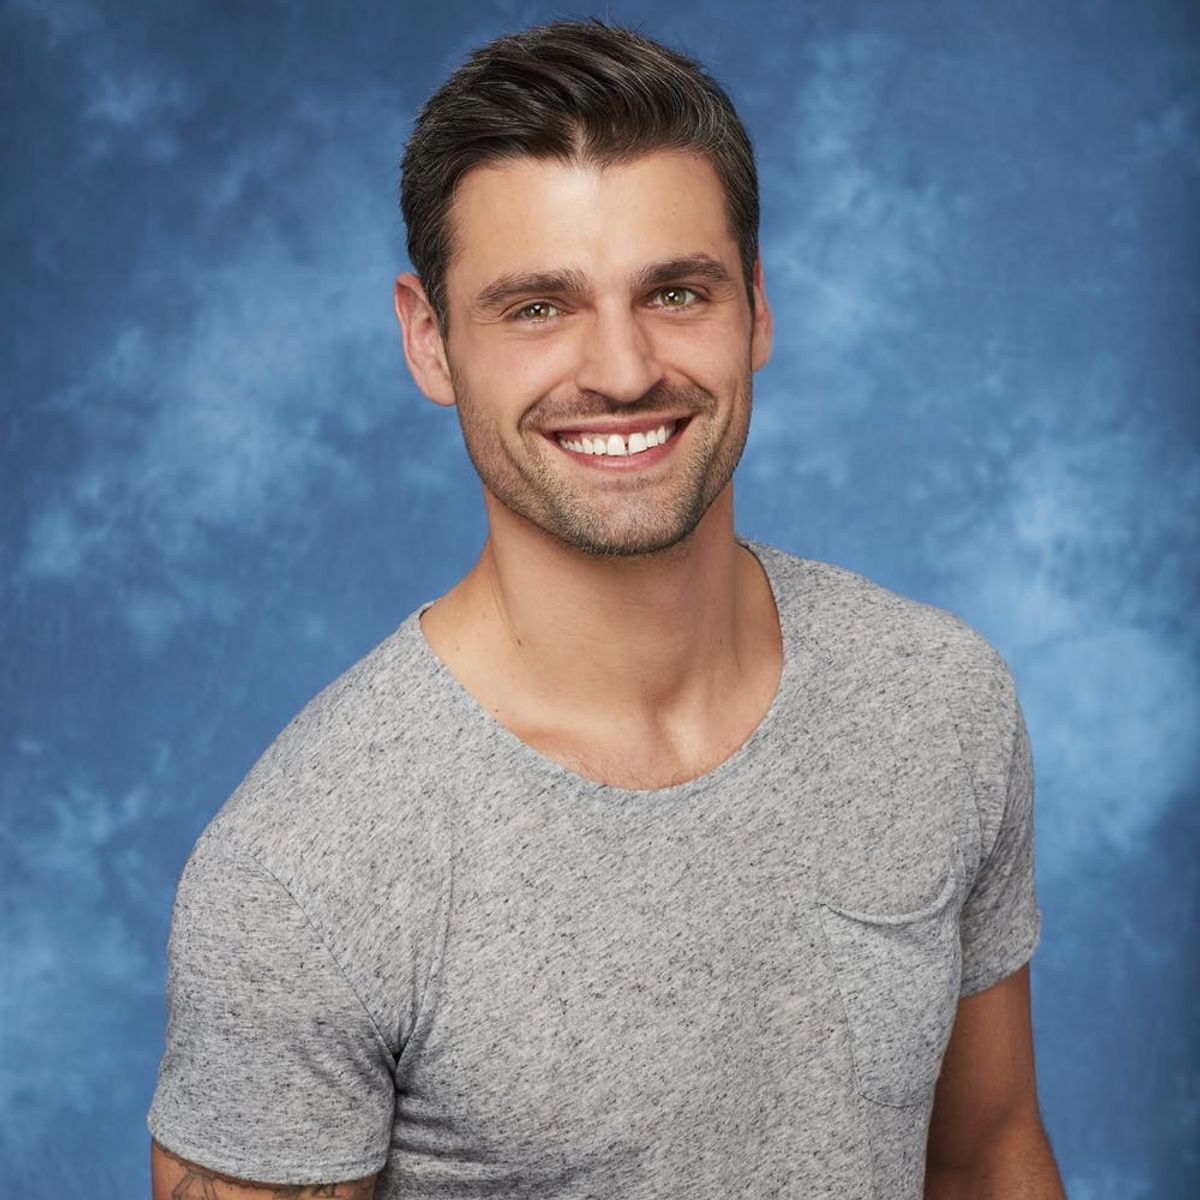 Peter Kraus Was “Afraid of What People Would Say” If He Became the Next Bachelor